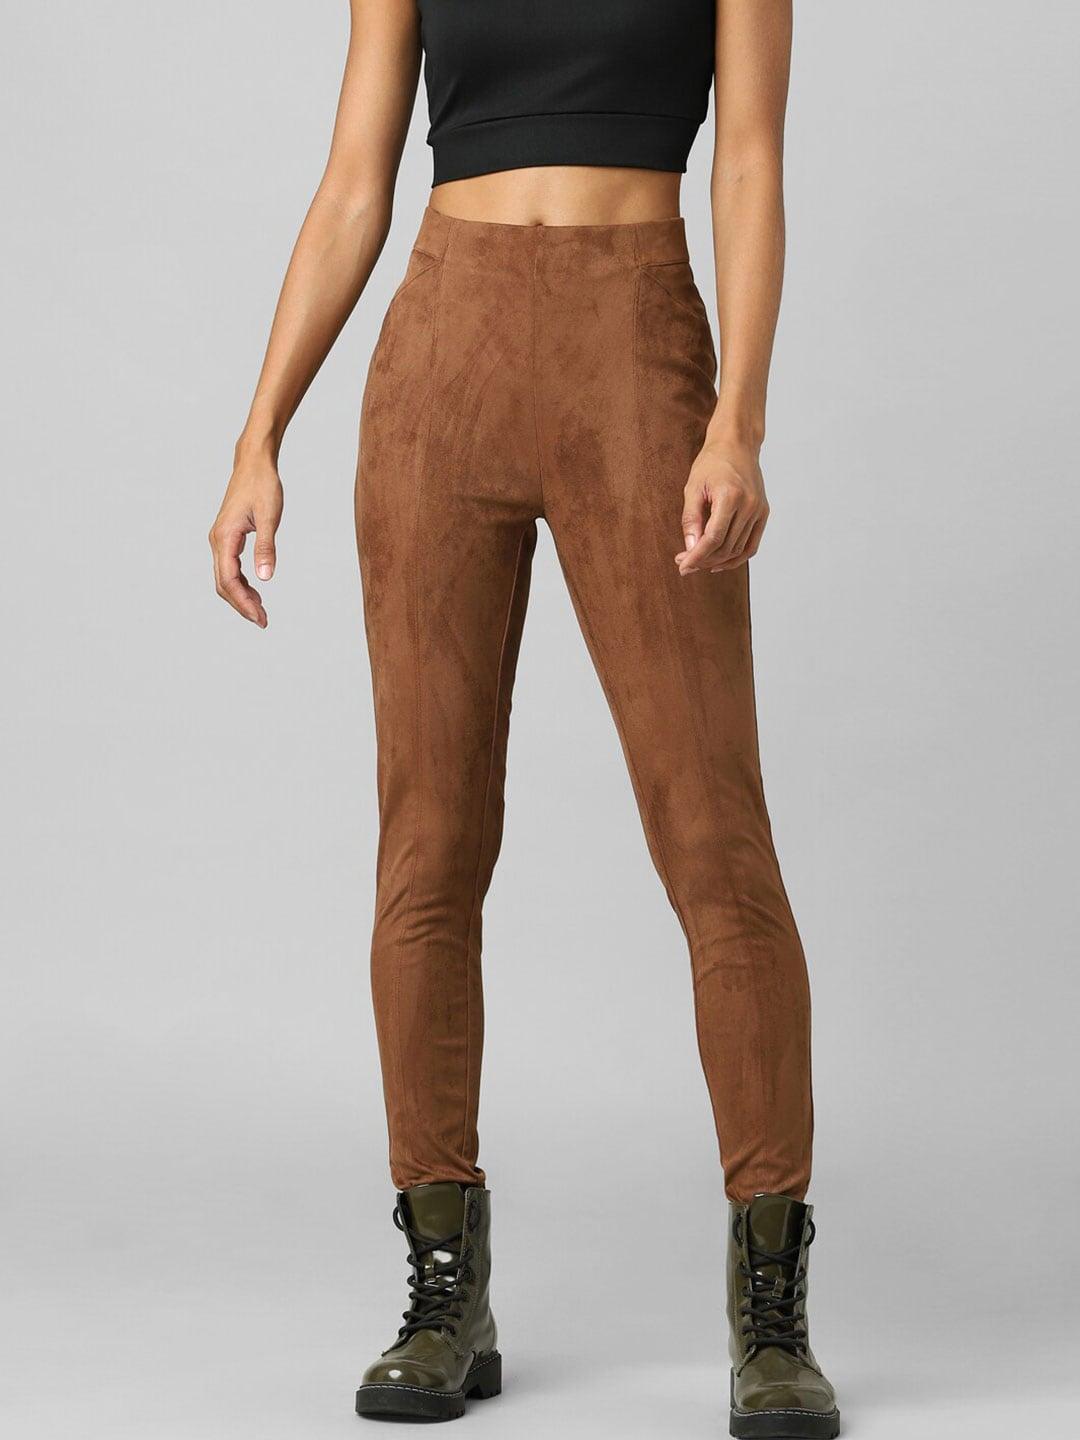 ONLY Women Brown Solid Faux Suede Ankle Length Jeggings